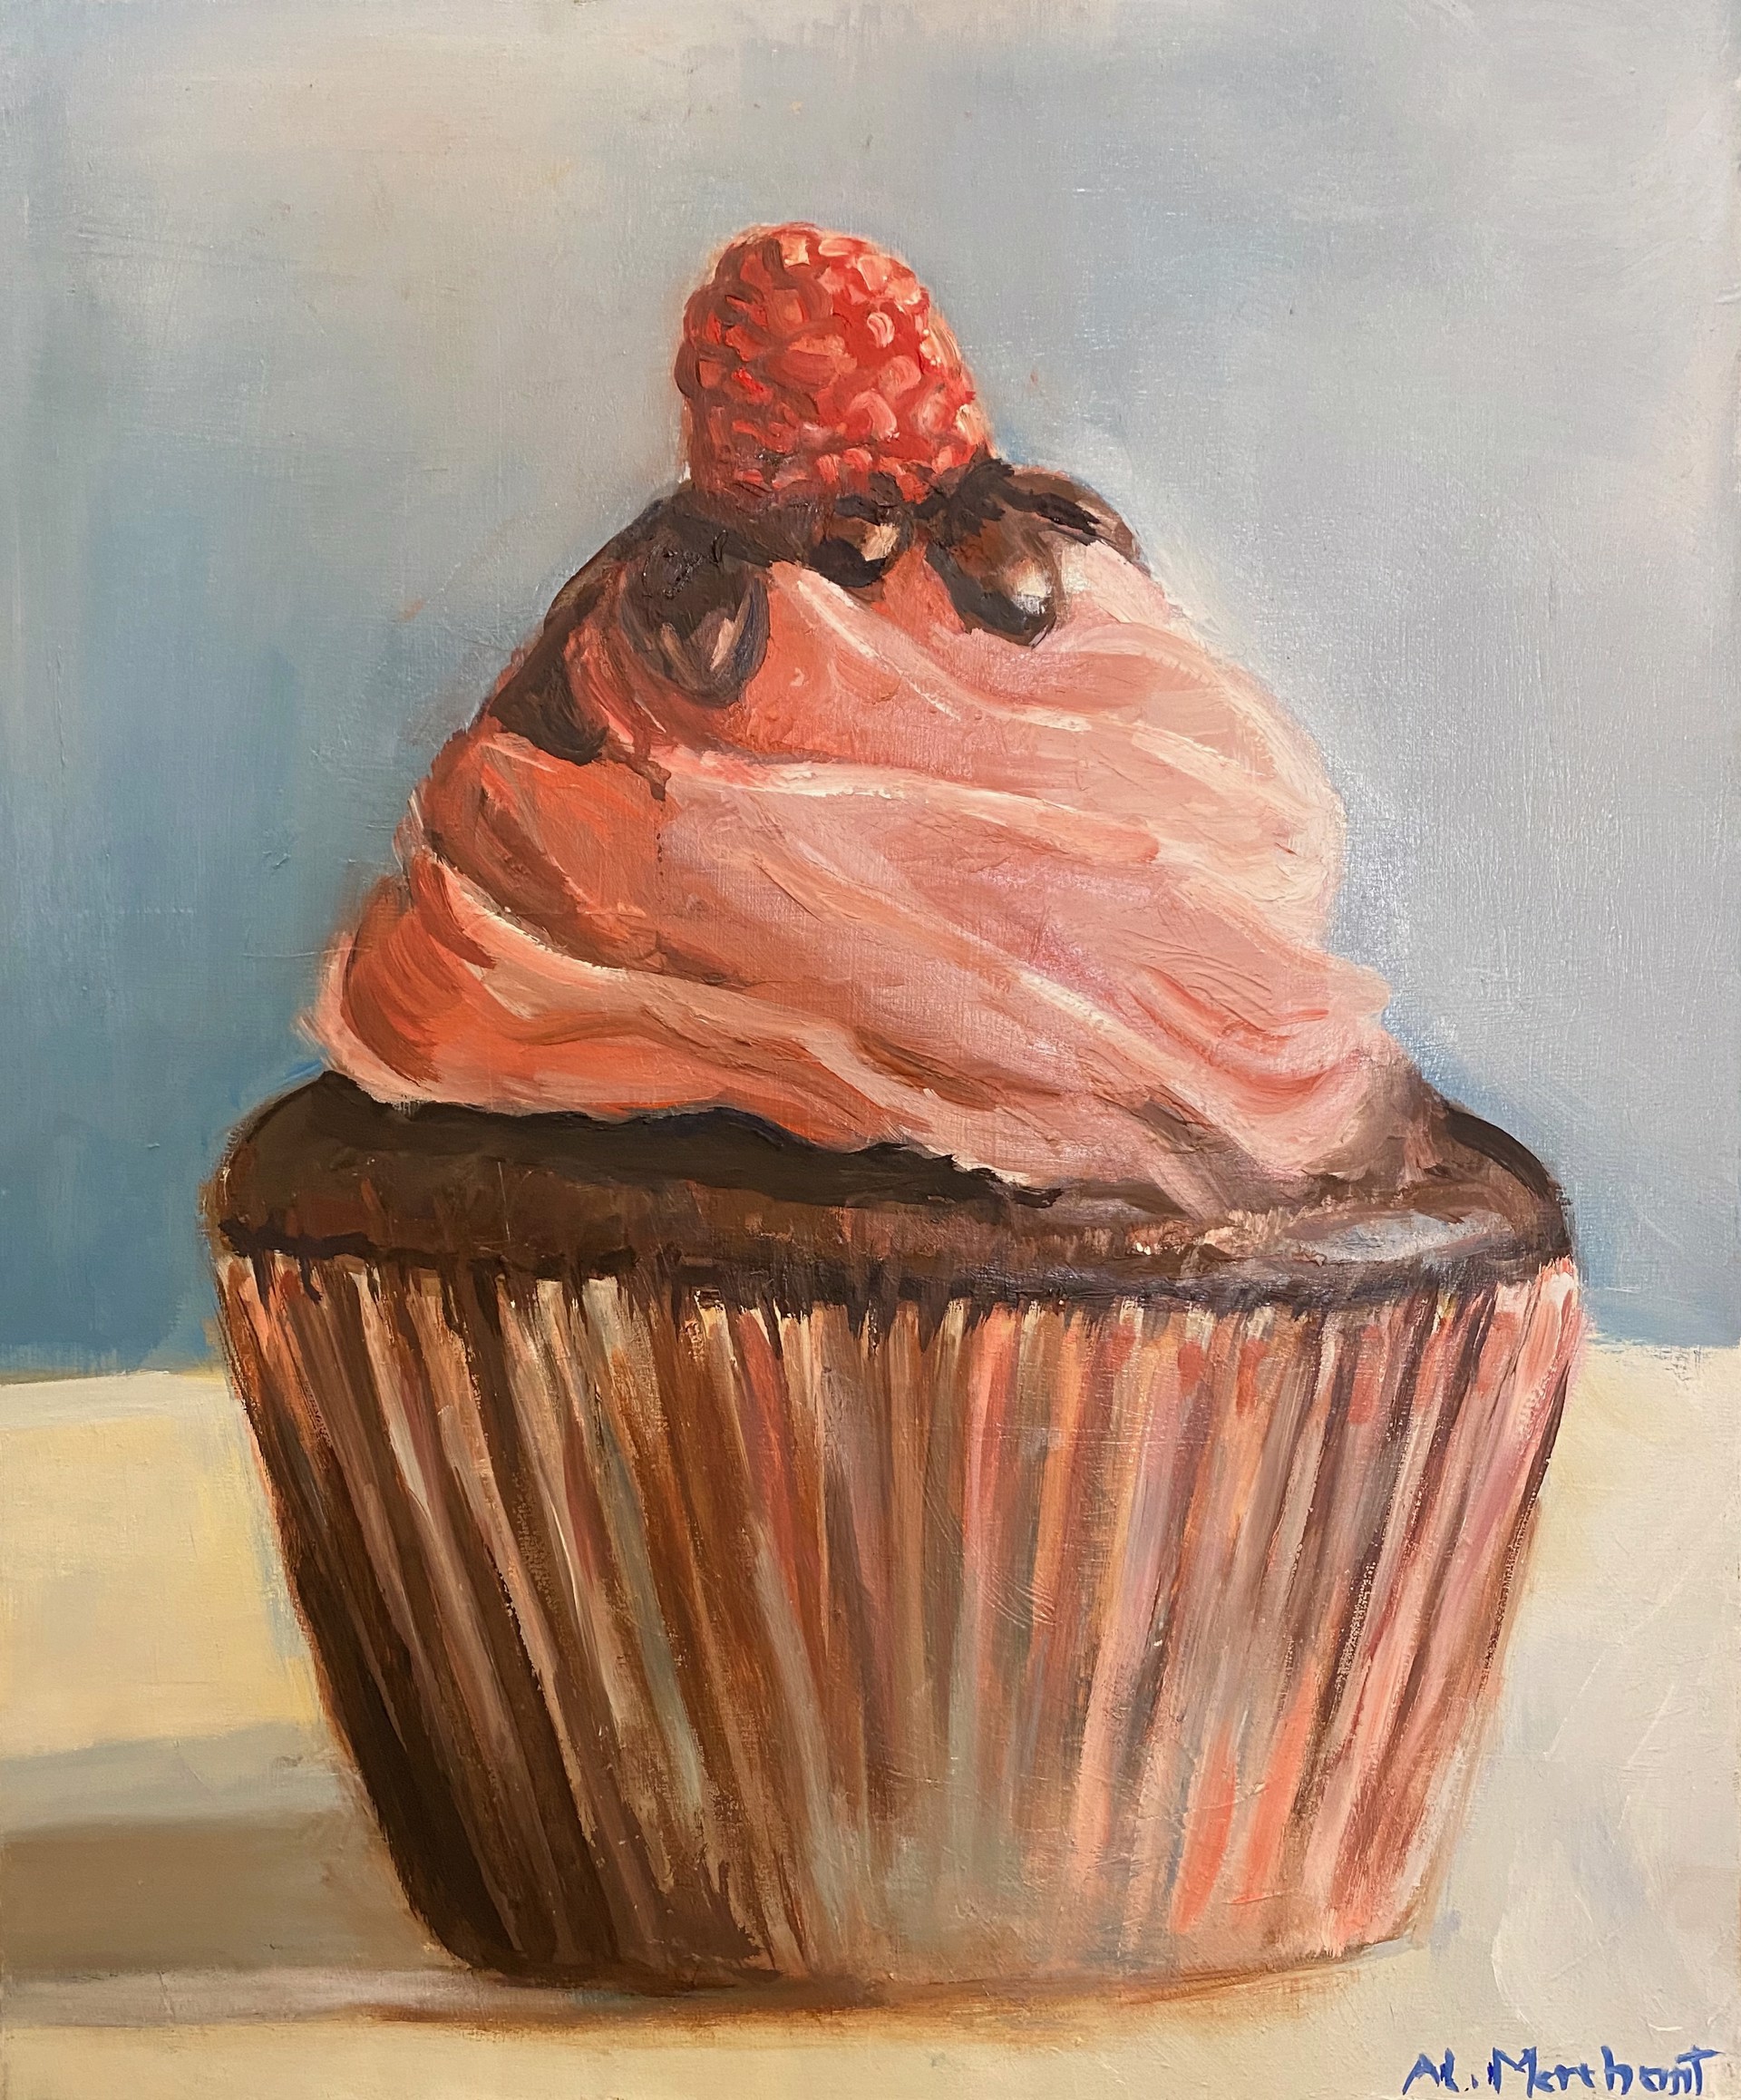 Cup Cake Moment by Anne-Lise Merchant